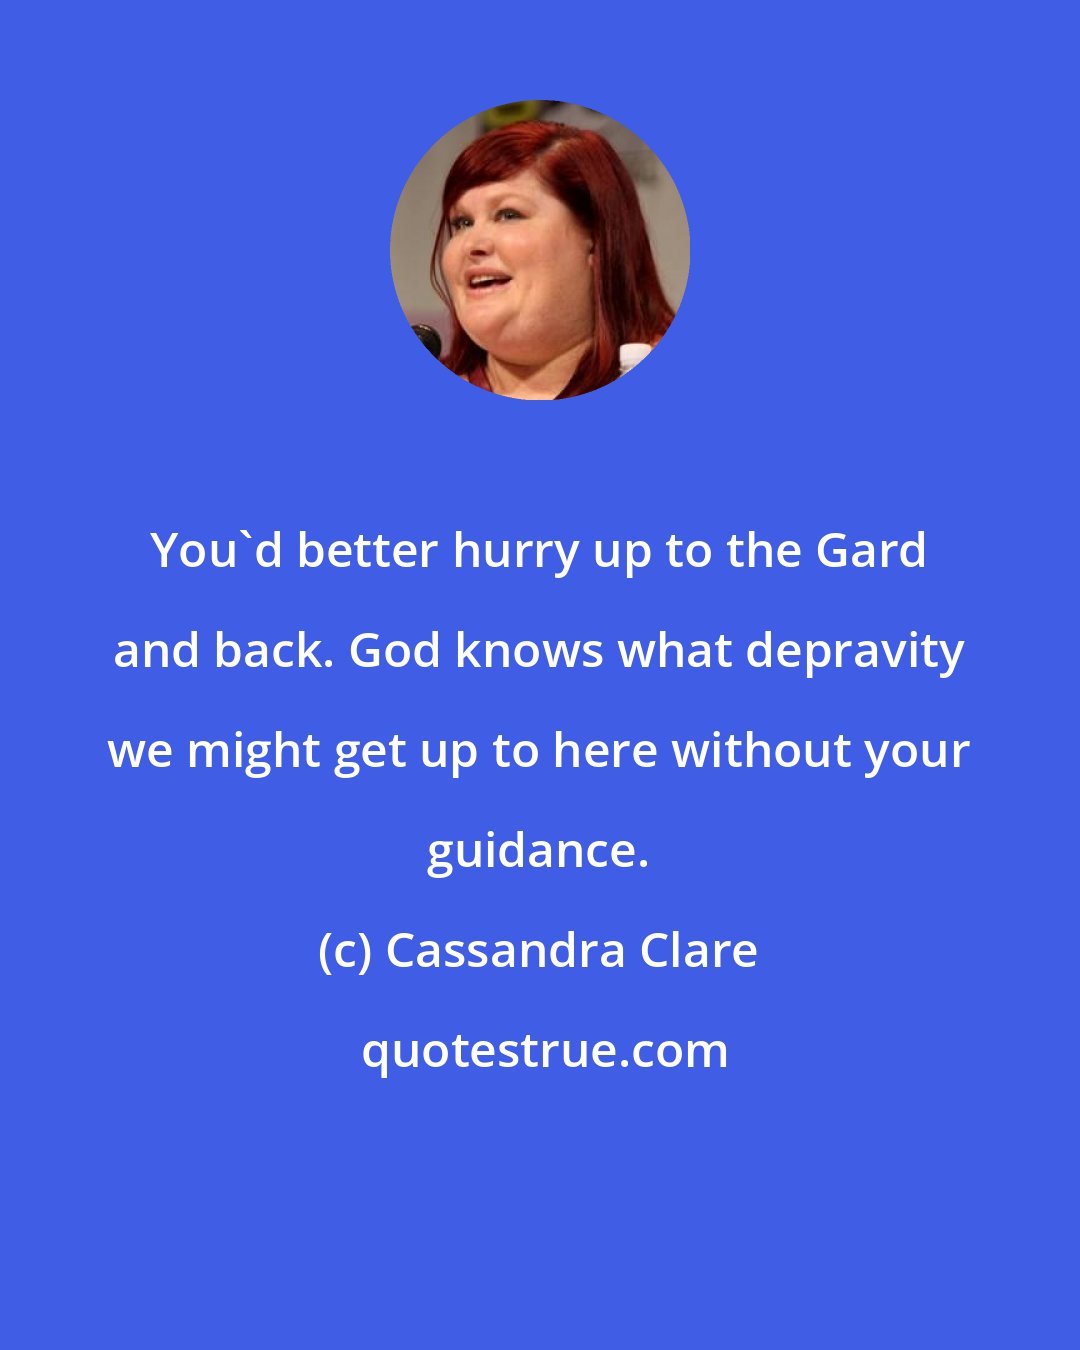 Cassandra Clare: You'd better hurry up to the Gard and back. God knows what depravity we might get up to here without your guidance.